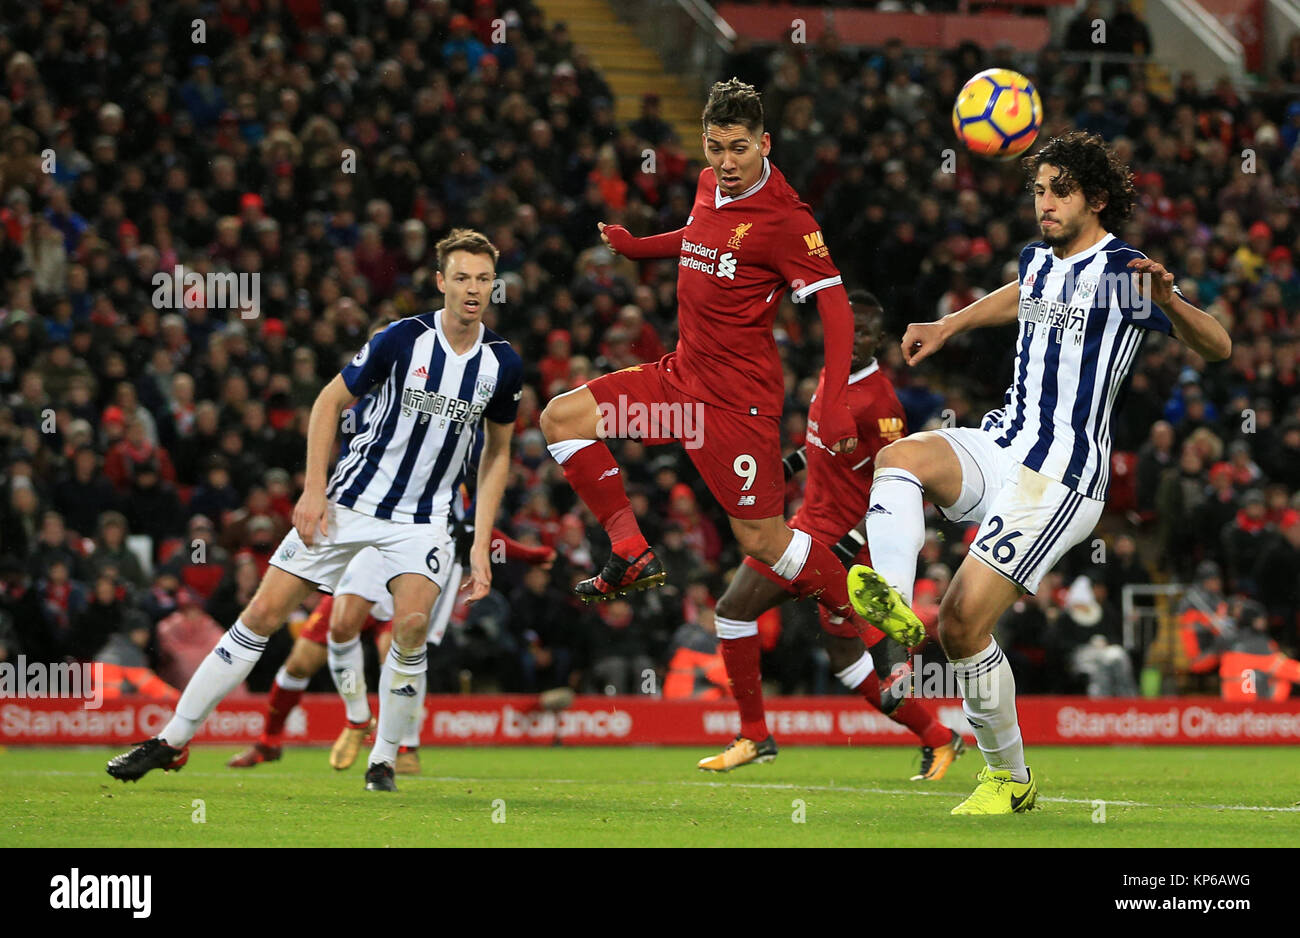 Liverpool's Roberto Firmino and West Bromwich Albion's Ahmed Hegazy battle for the ball during the Premier League match at Anfield, Liverpool. Stock Photo